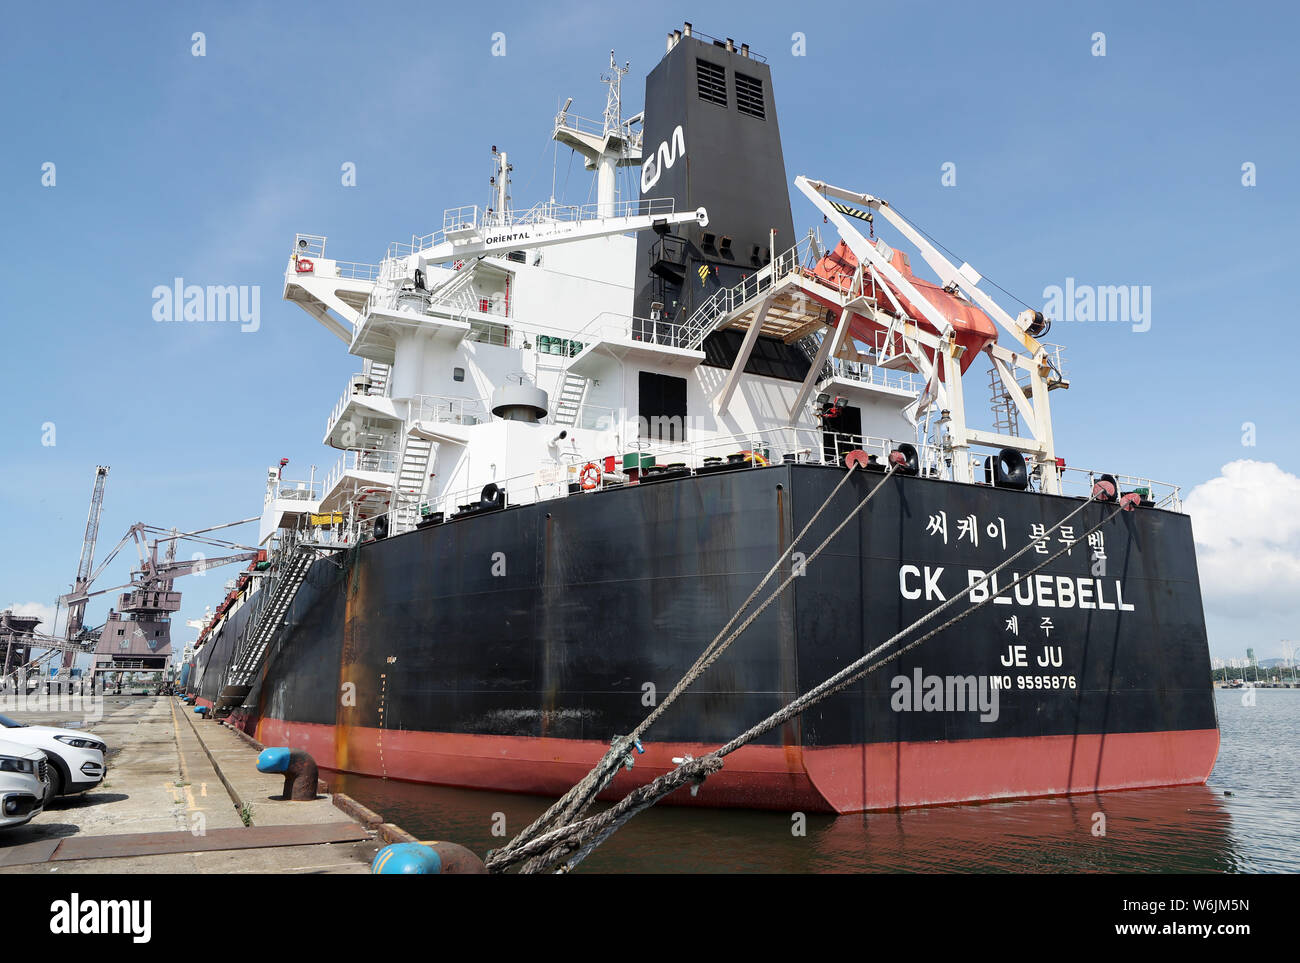 02nd Aug, 2019. Korean ship arrives after being attacked by pirates A South Korean freighter, the 44,132-ton CK Bluebell, is moored at a port in the city of Incheon, west of Seoul, on Aug. 2, 2019. The ship's arrival came after it was attacked by pirates near the Singapore Strait on July 22. During the attack, pirates armed with guns and knives assaulted sailors of the South Korean-registered vessel before making off with US$13,000 in cash. Credit: Yonhap/Newcom/Alamy Live News Stock Photo